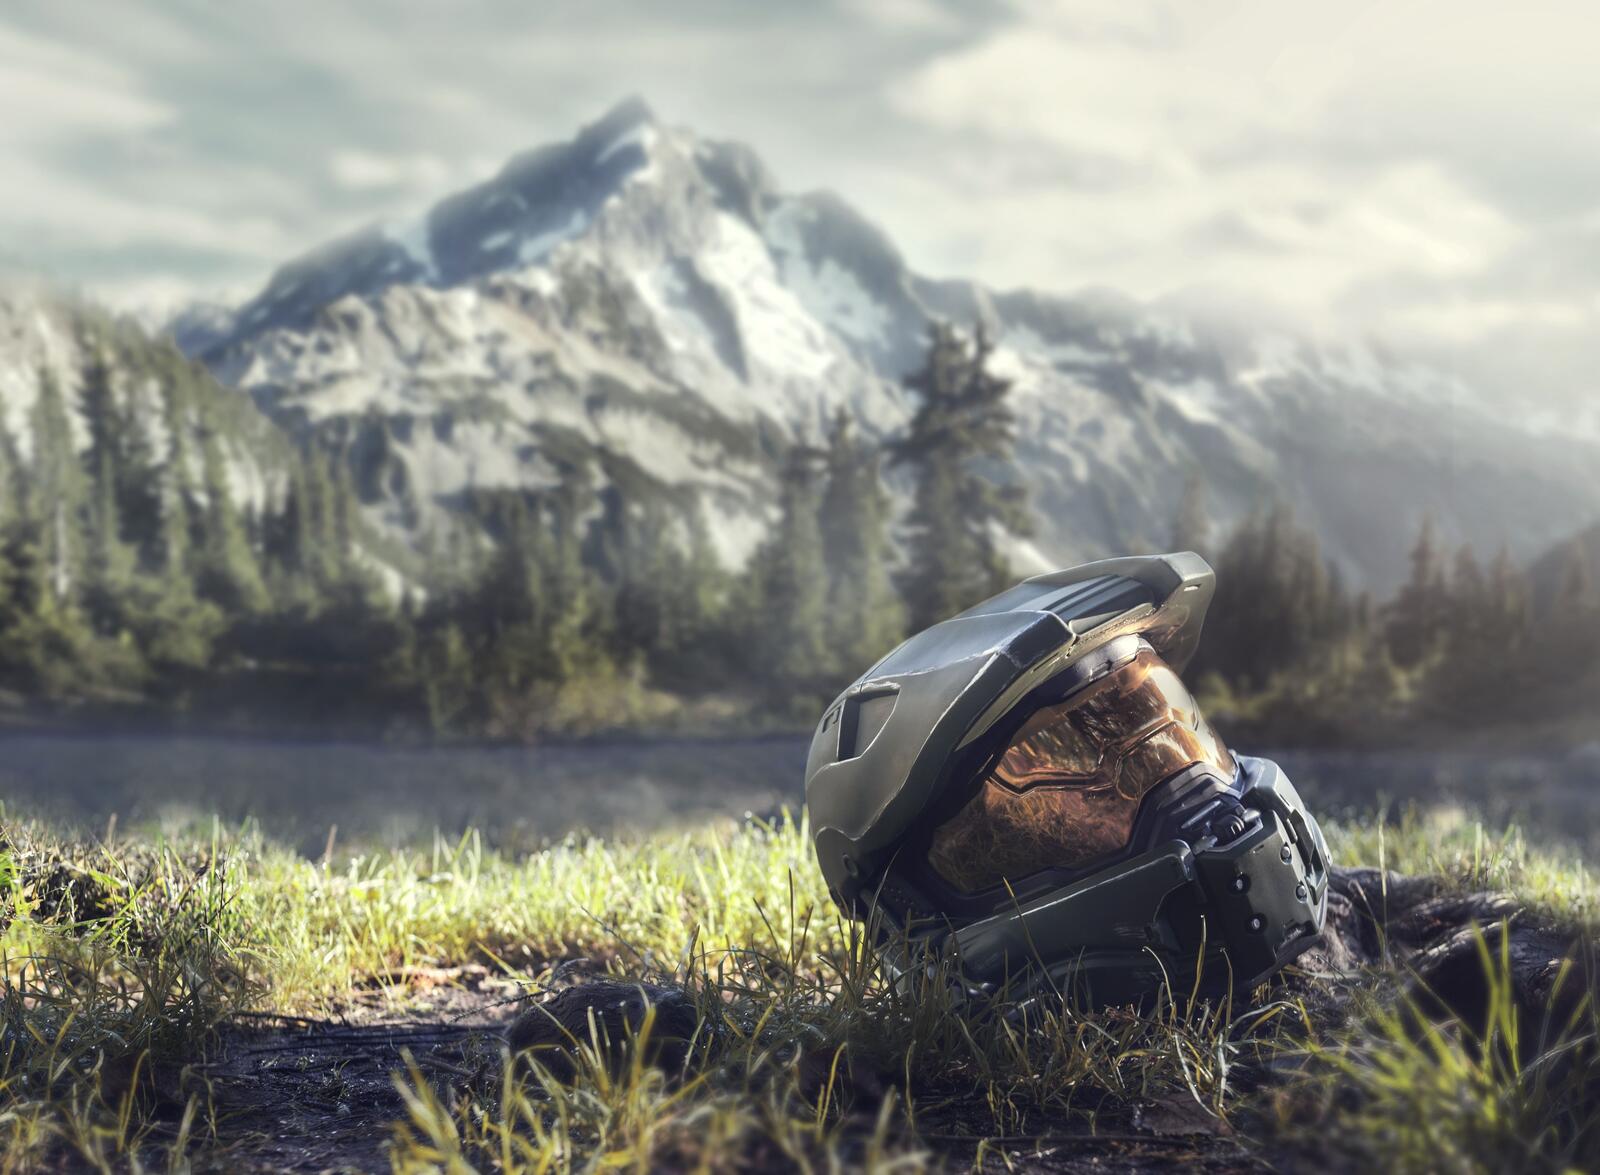 Free photo Helo 5 helmet lying on the grass against a backdrop of mountains